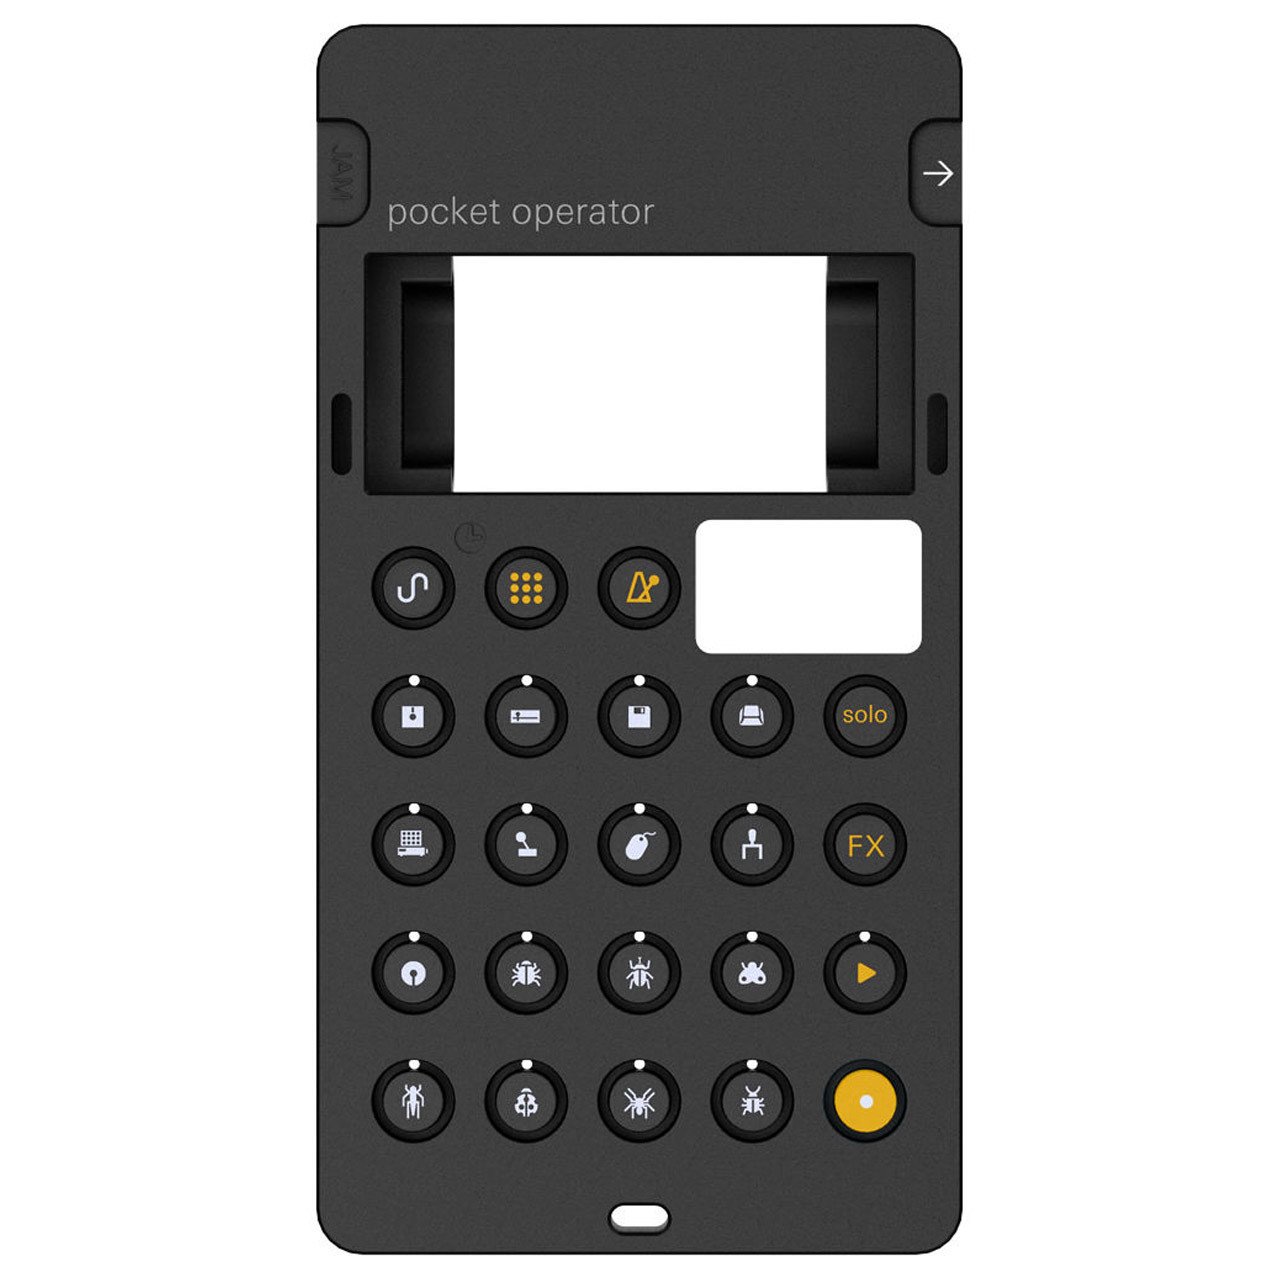 Keyboard Accessories - Teenage Engineering CA-24 Silicone Pro-case For PO-24 Pocket Operator